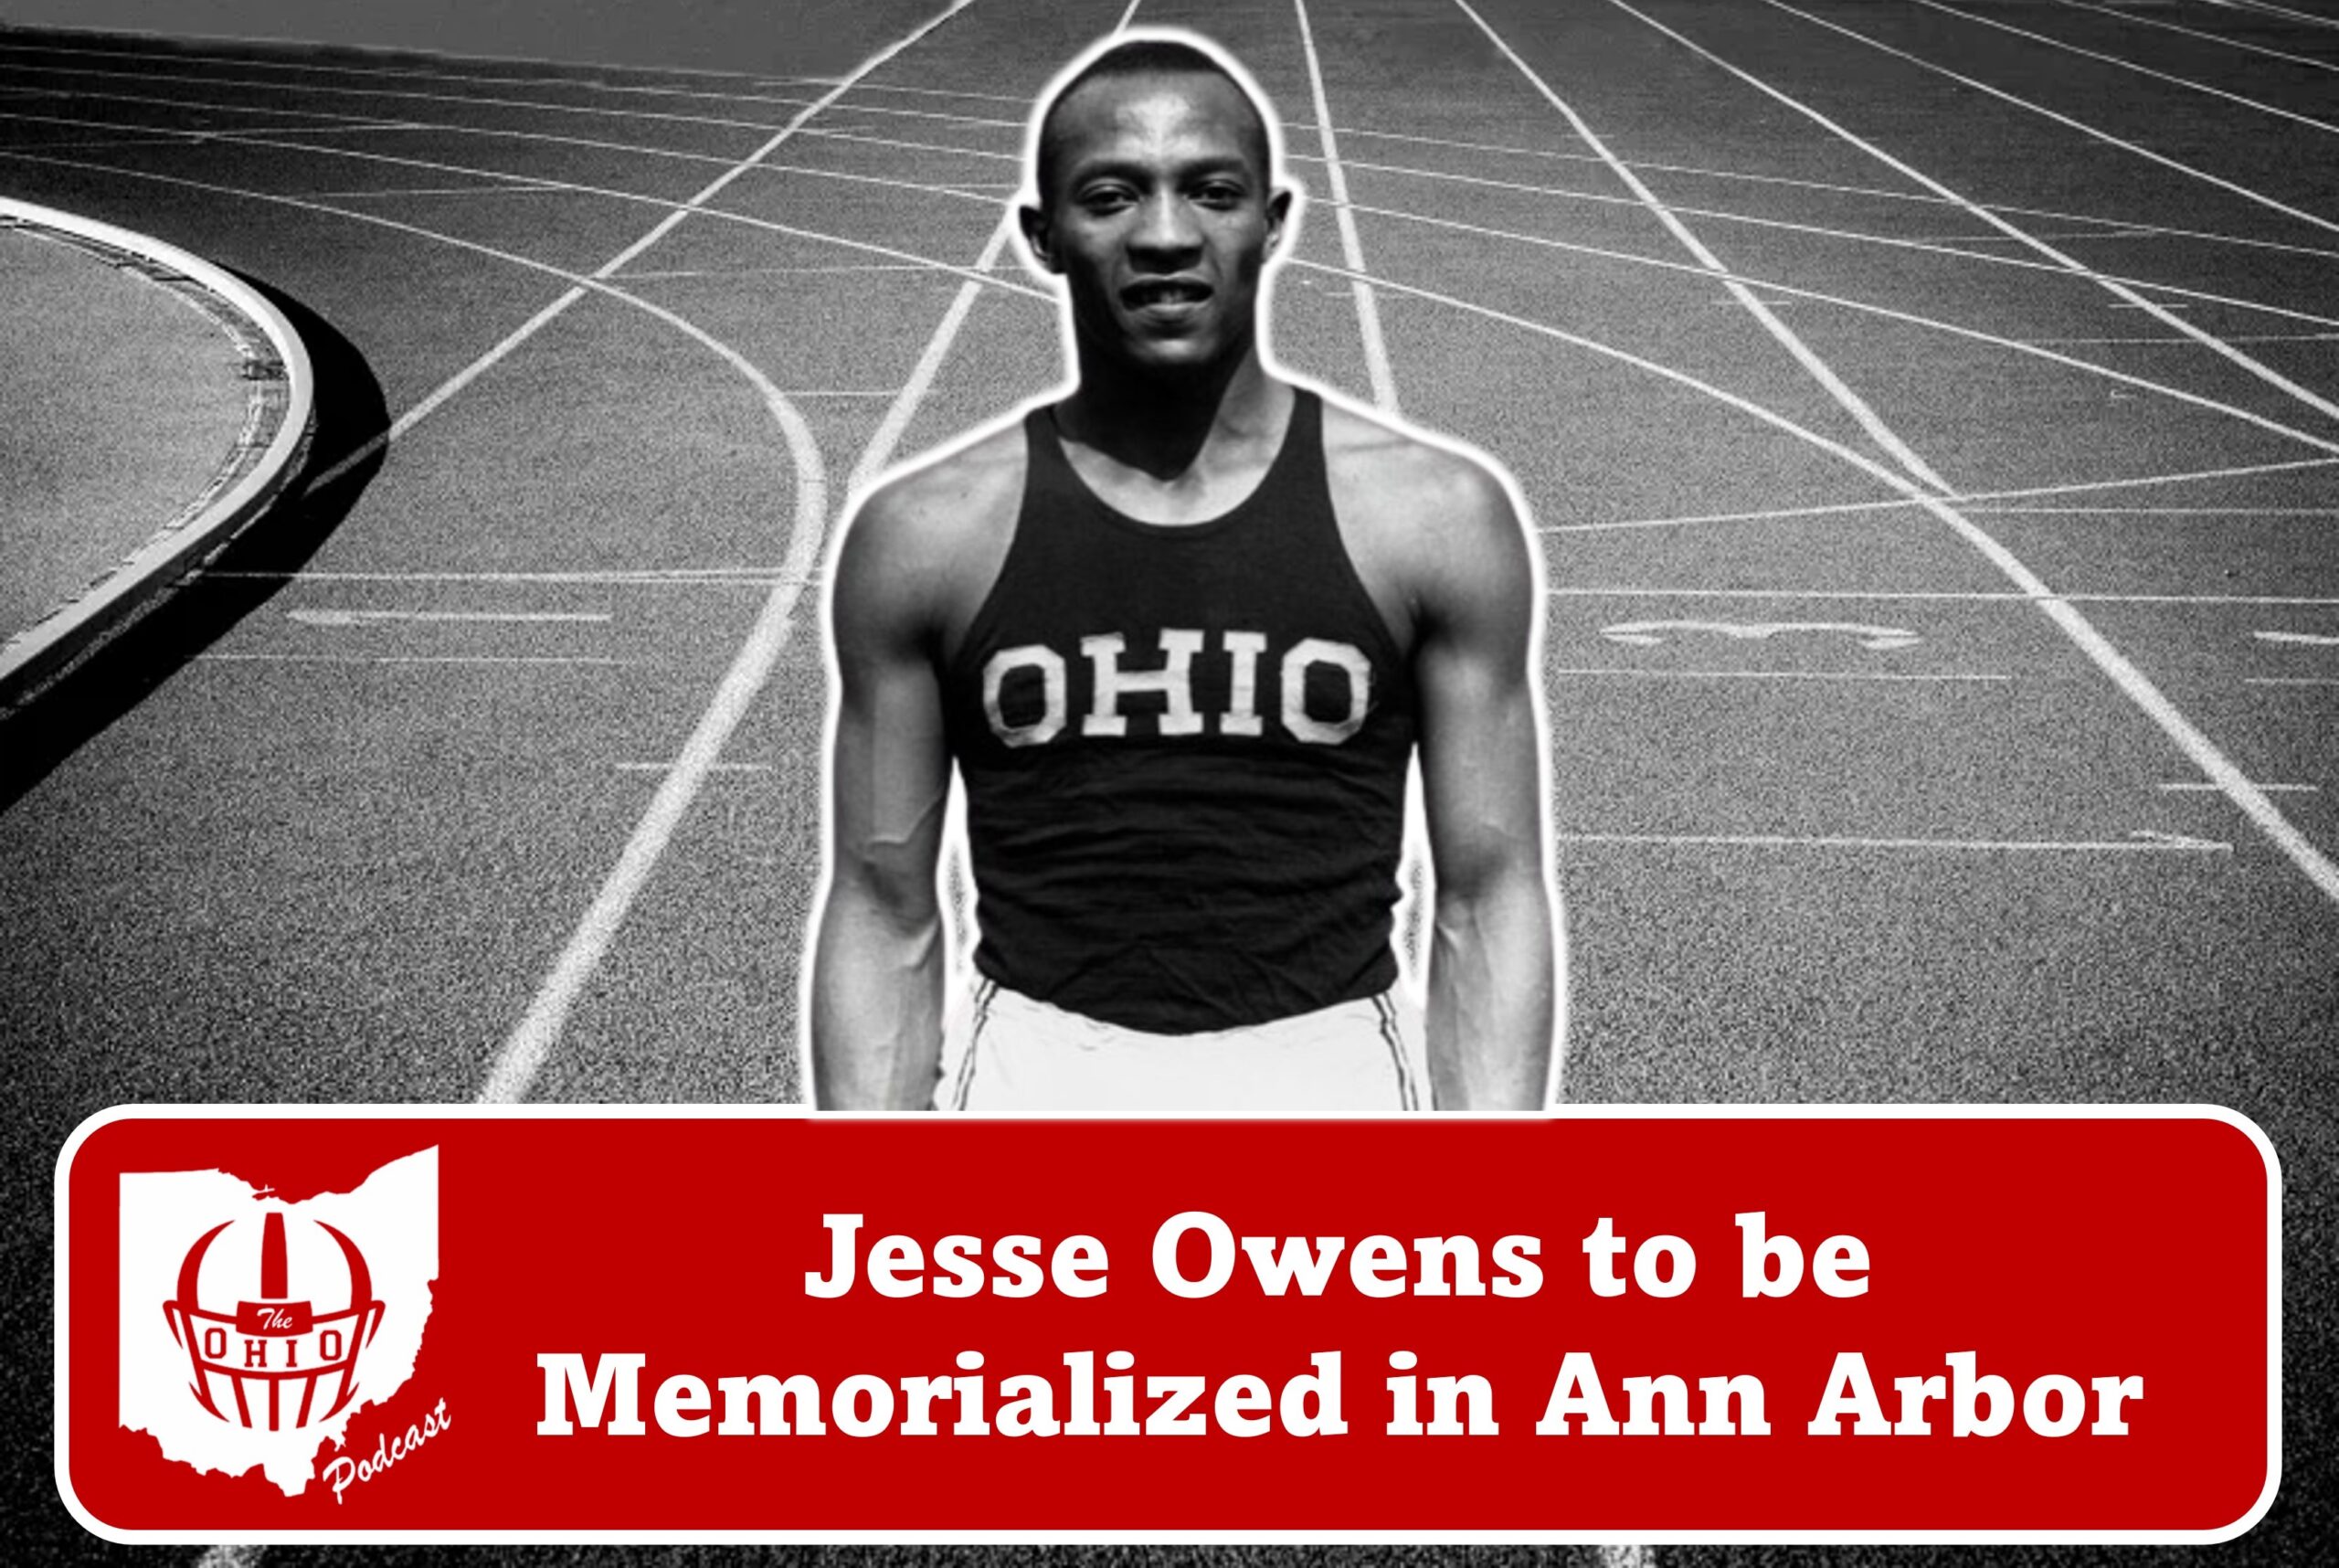 Jesse Owens to be Honored in Ann Arbor